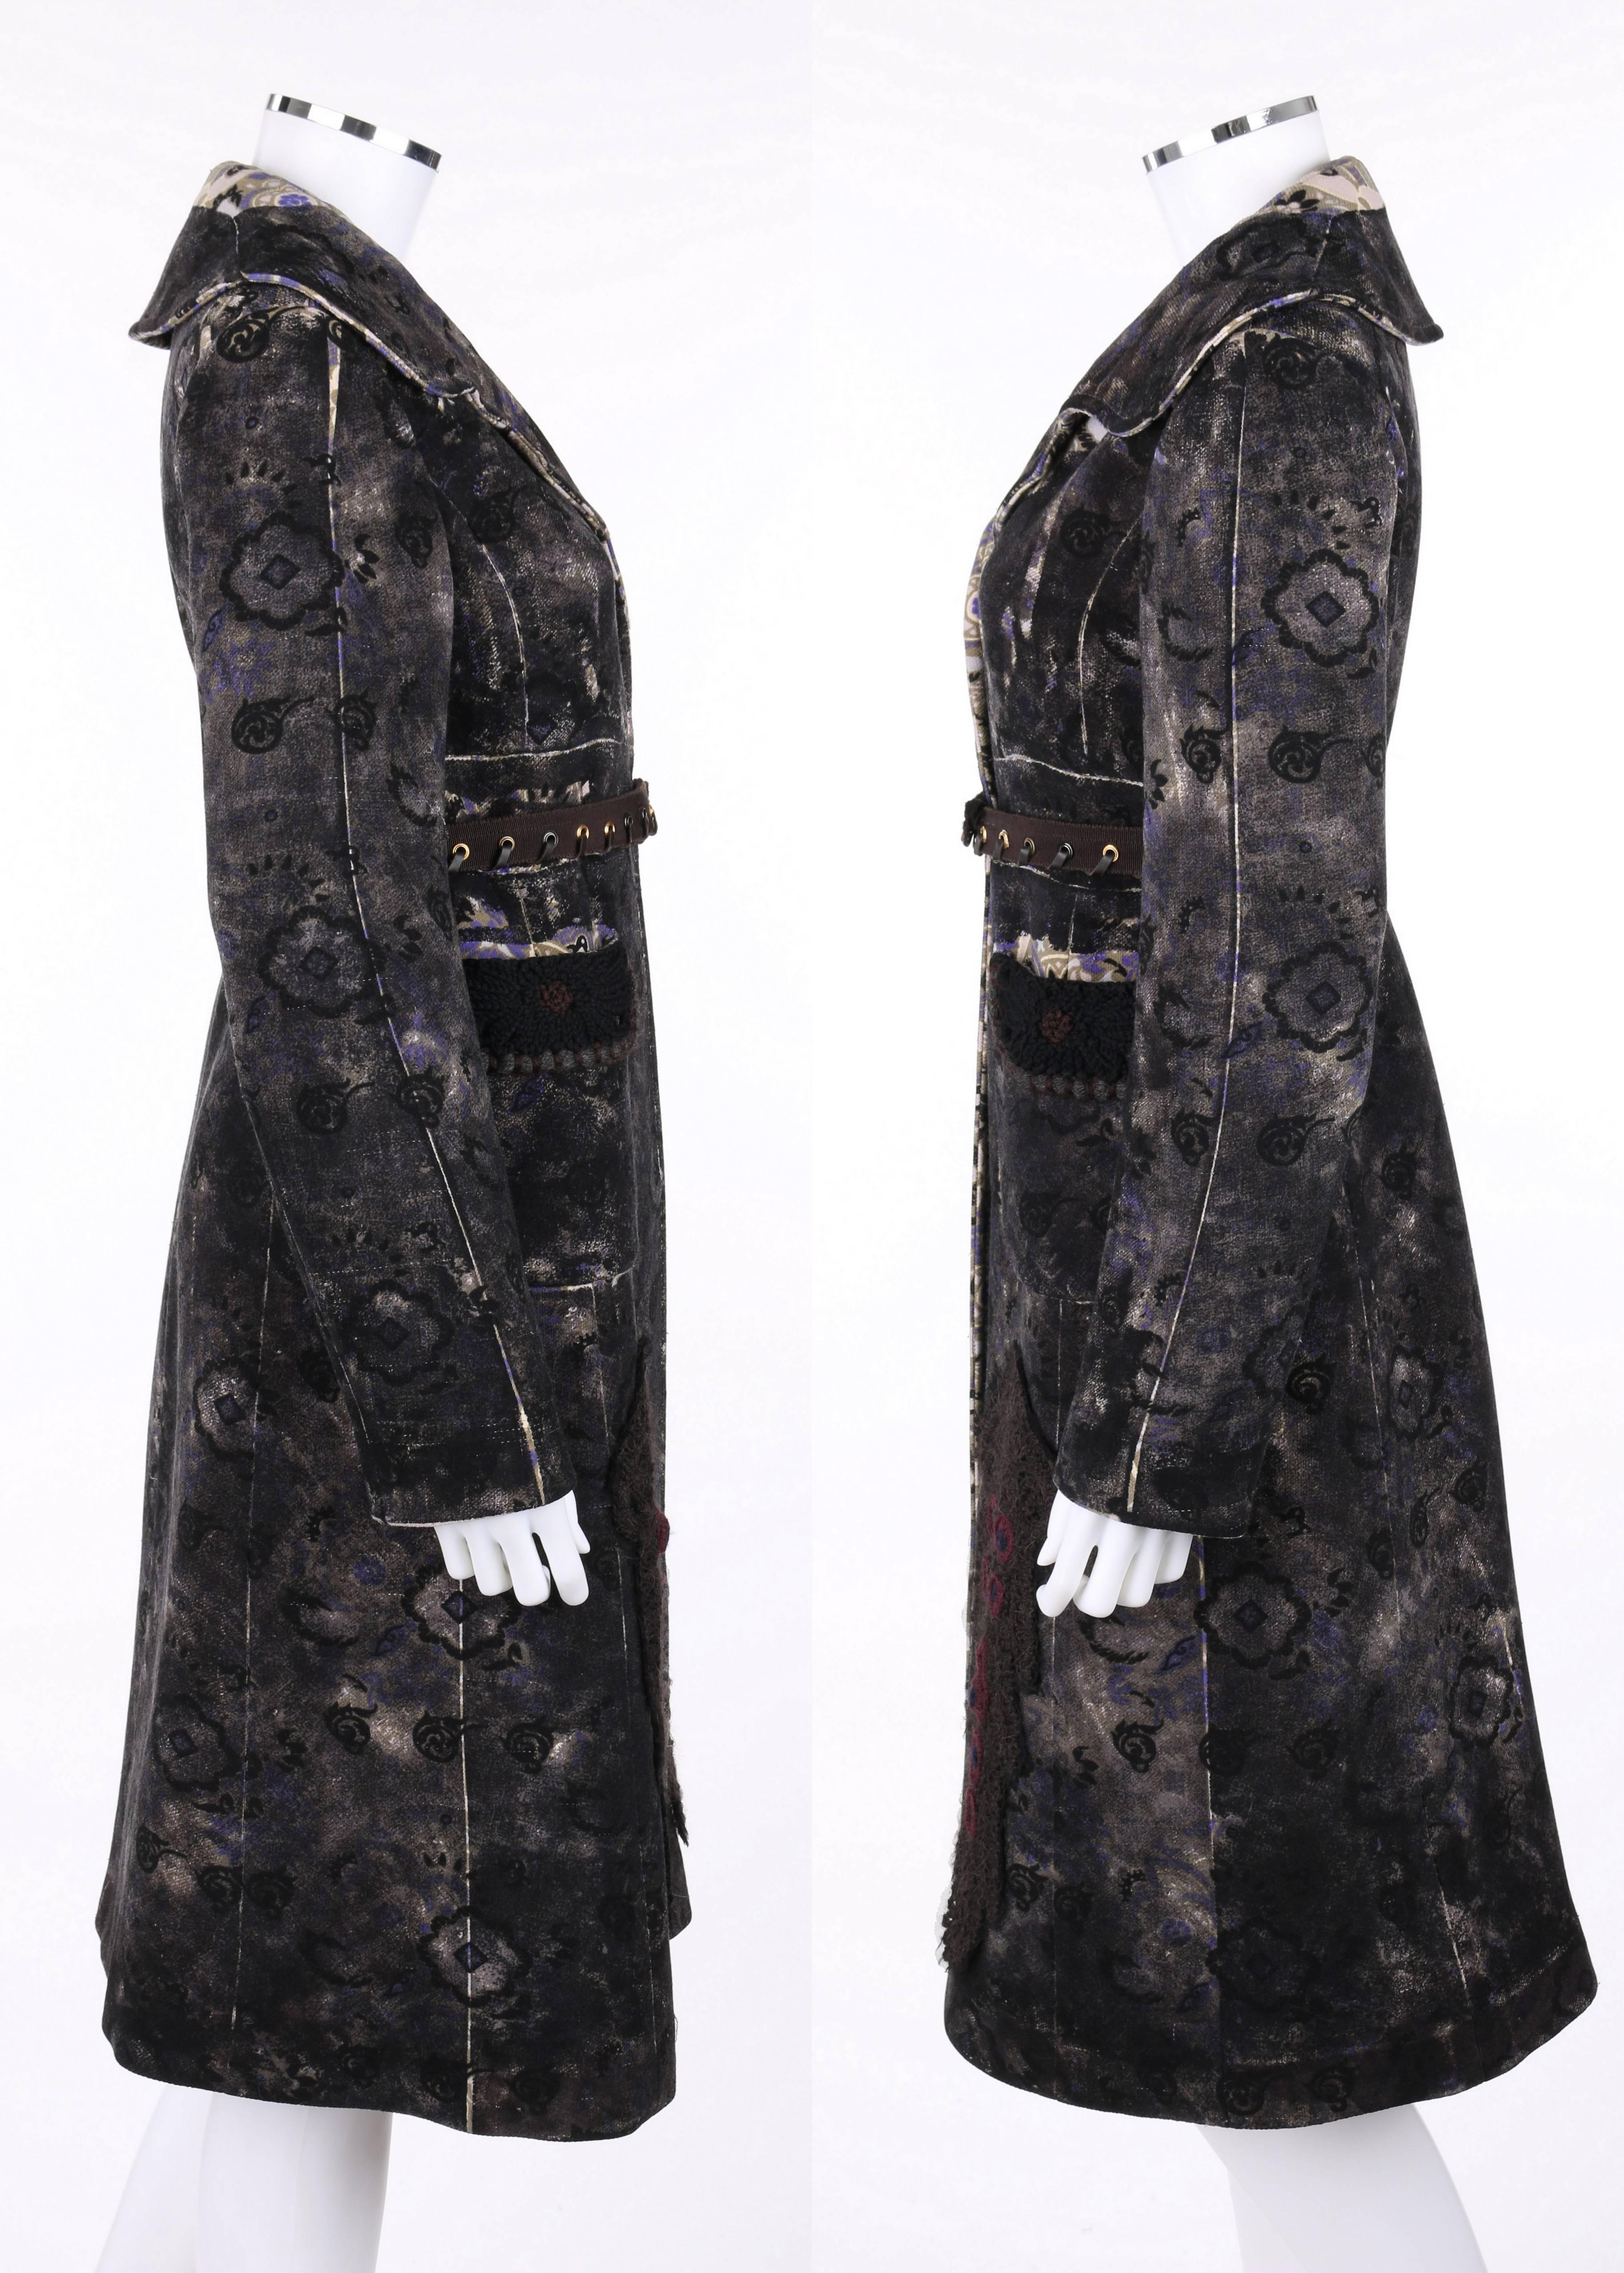 PRADA A/W 2005 Charcoal Gray Floral Print Crochet Applique Princess Coat + Belt In Excellent Condition In Thiensville, WI